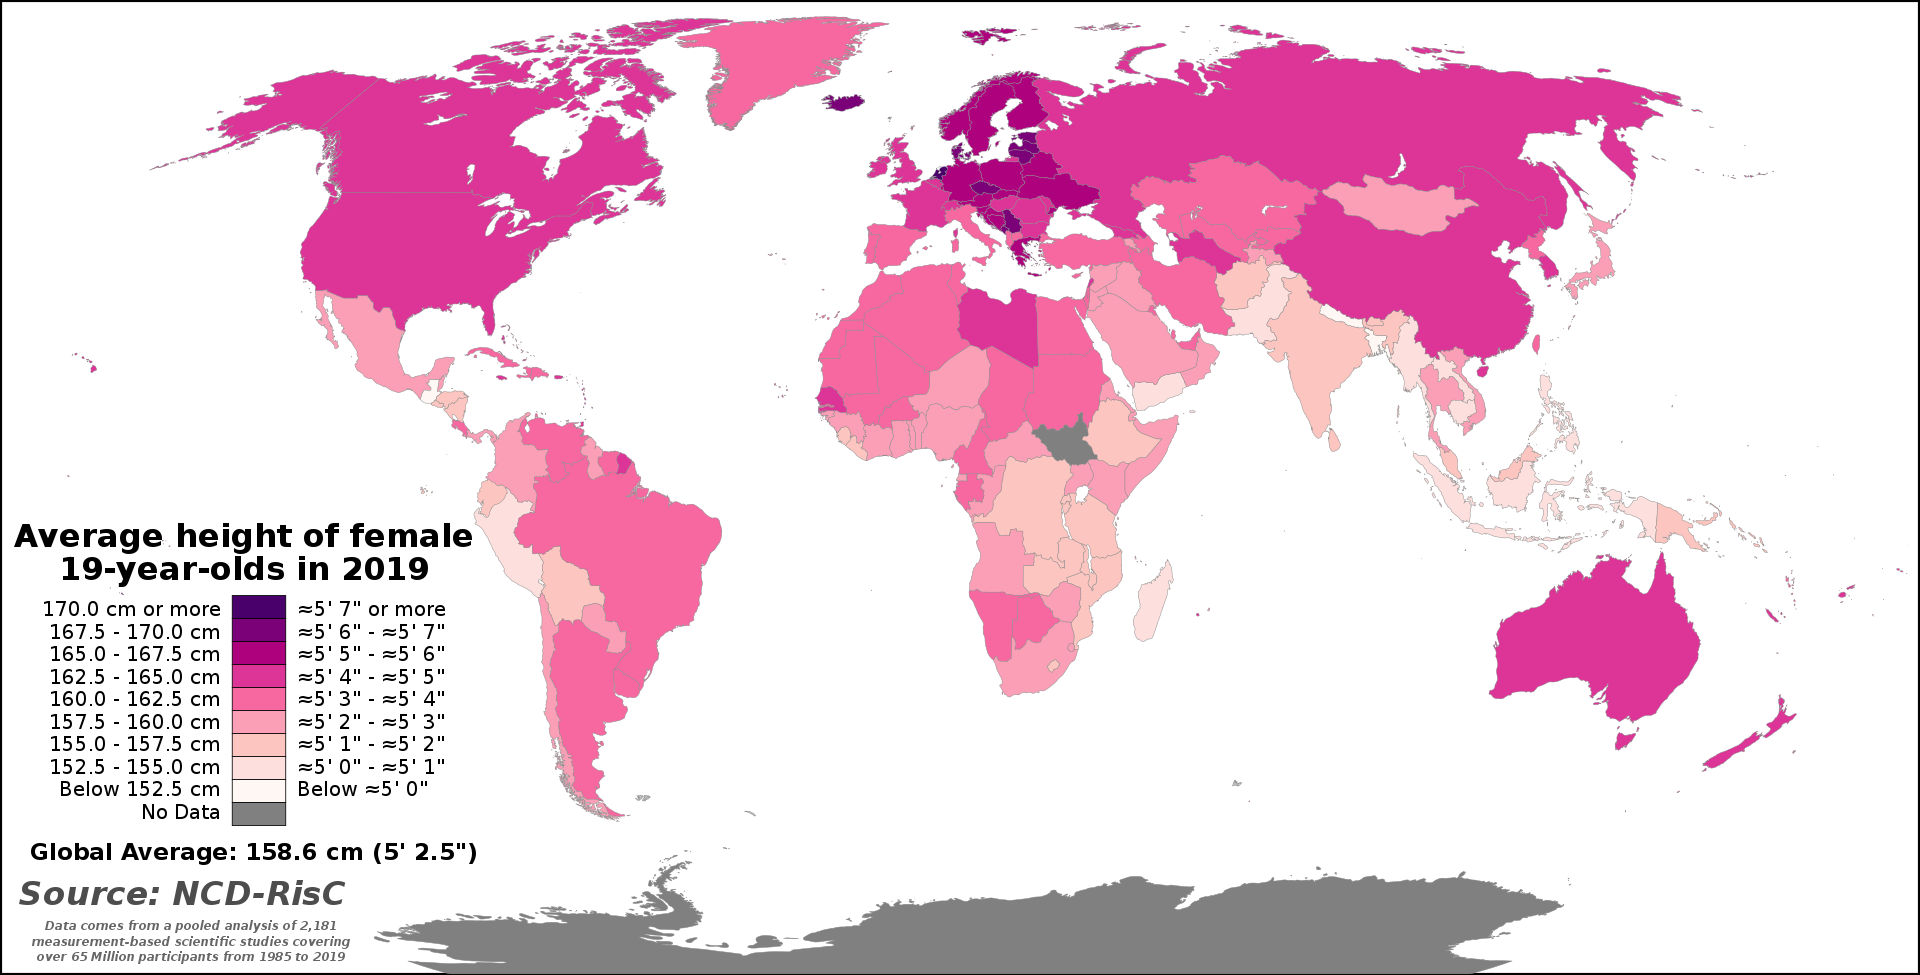 1920px-Average_height_of_female_19-year-olds_by_country_in_2019.svg.png